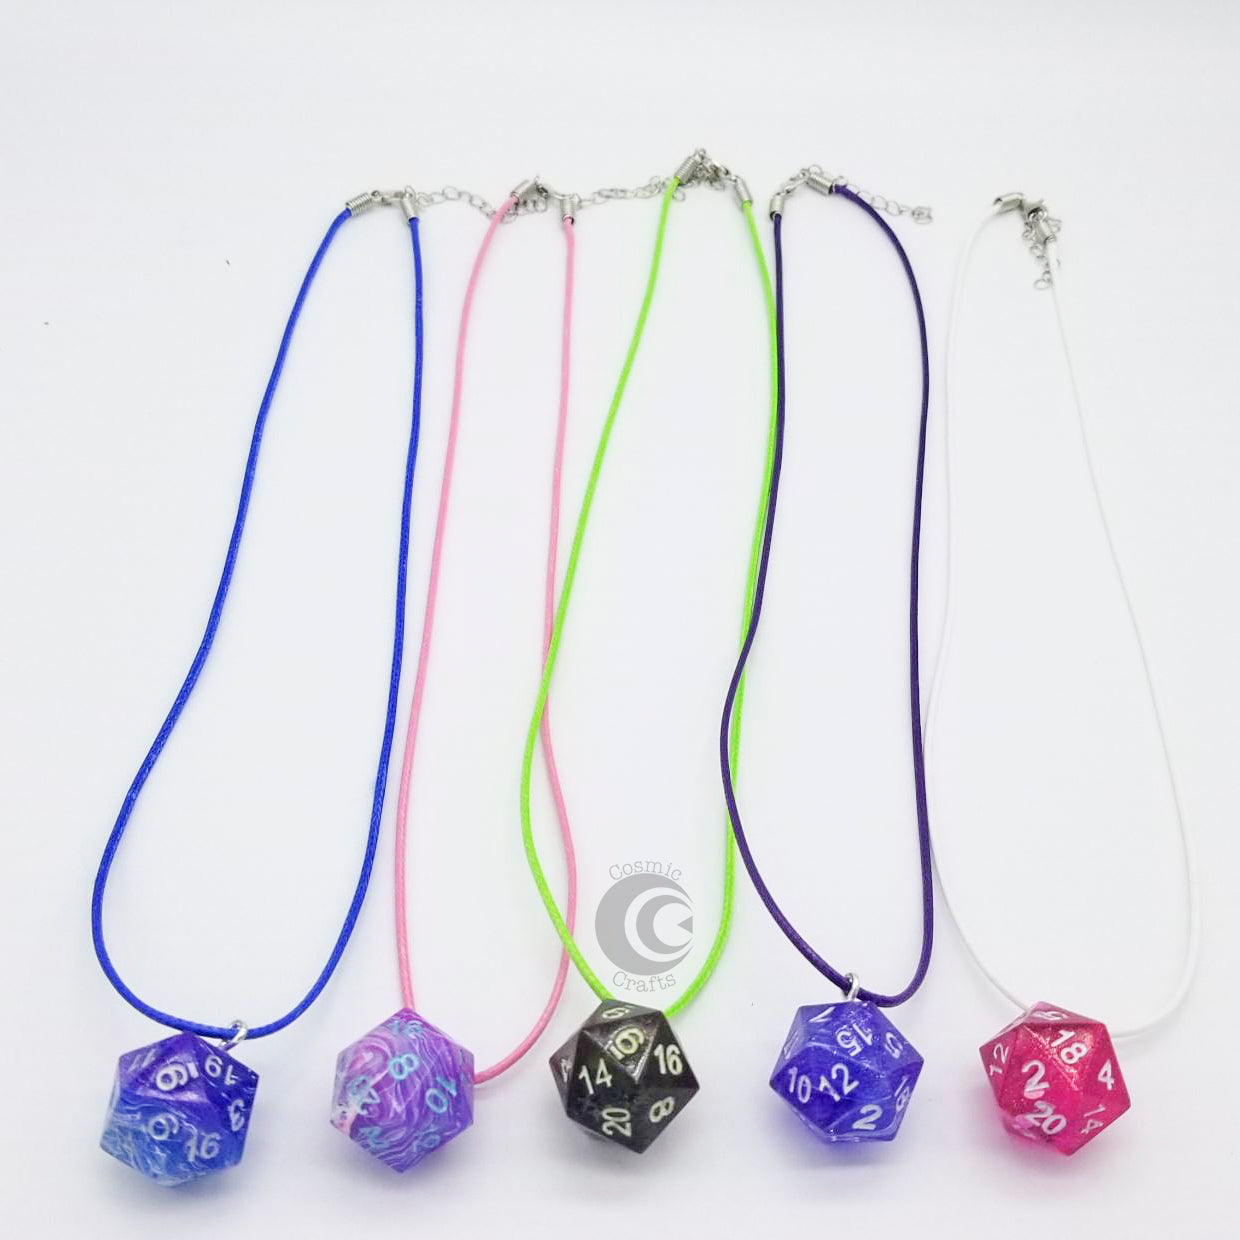 D20 Necklace – Cosmic Crafts Store